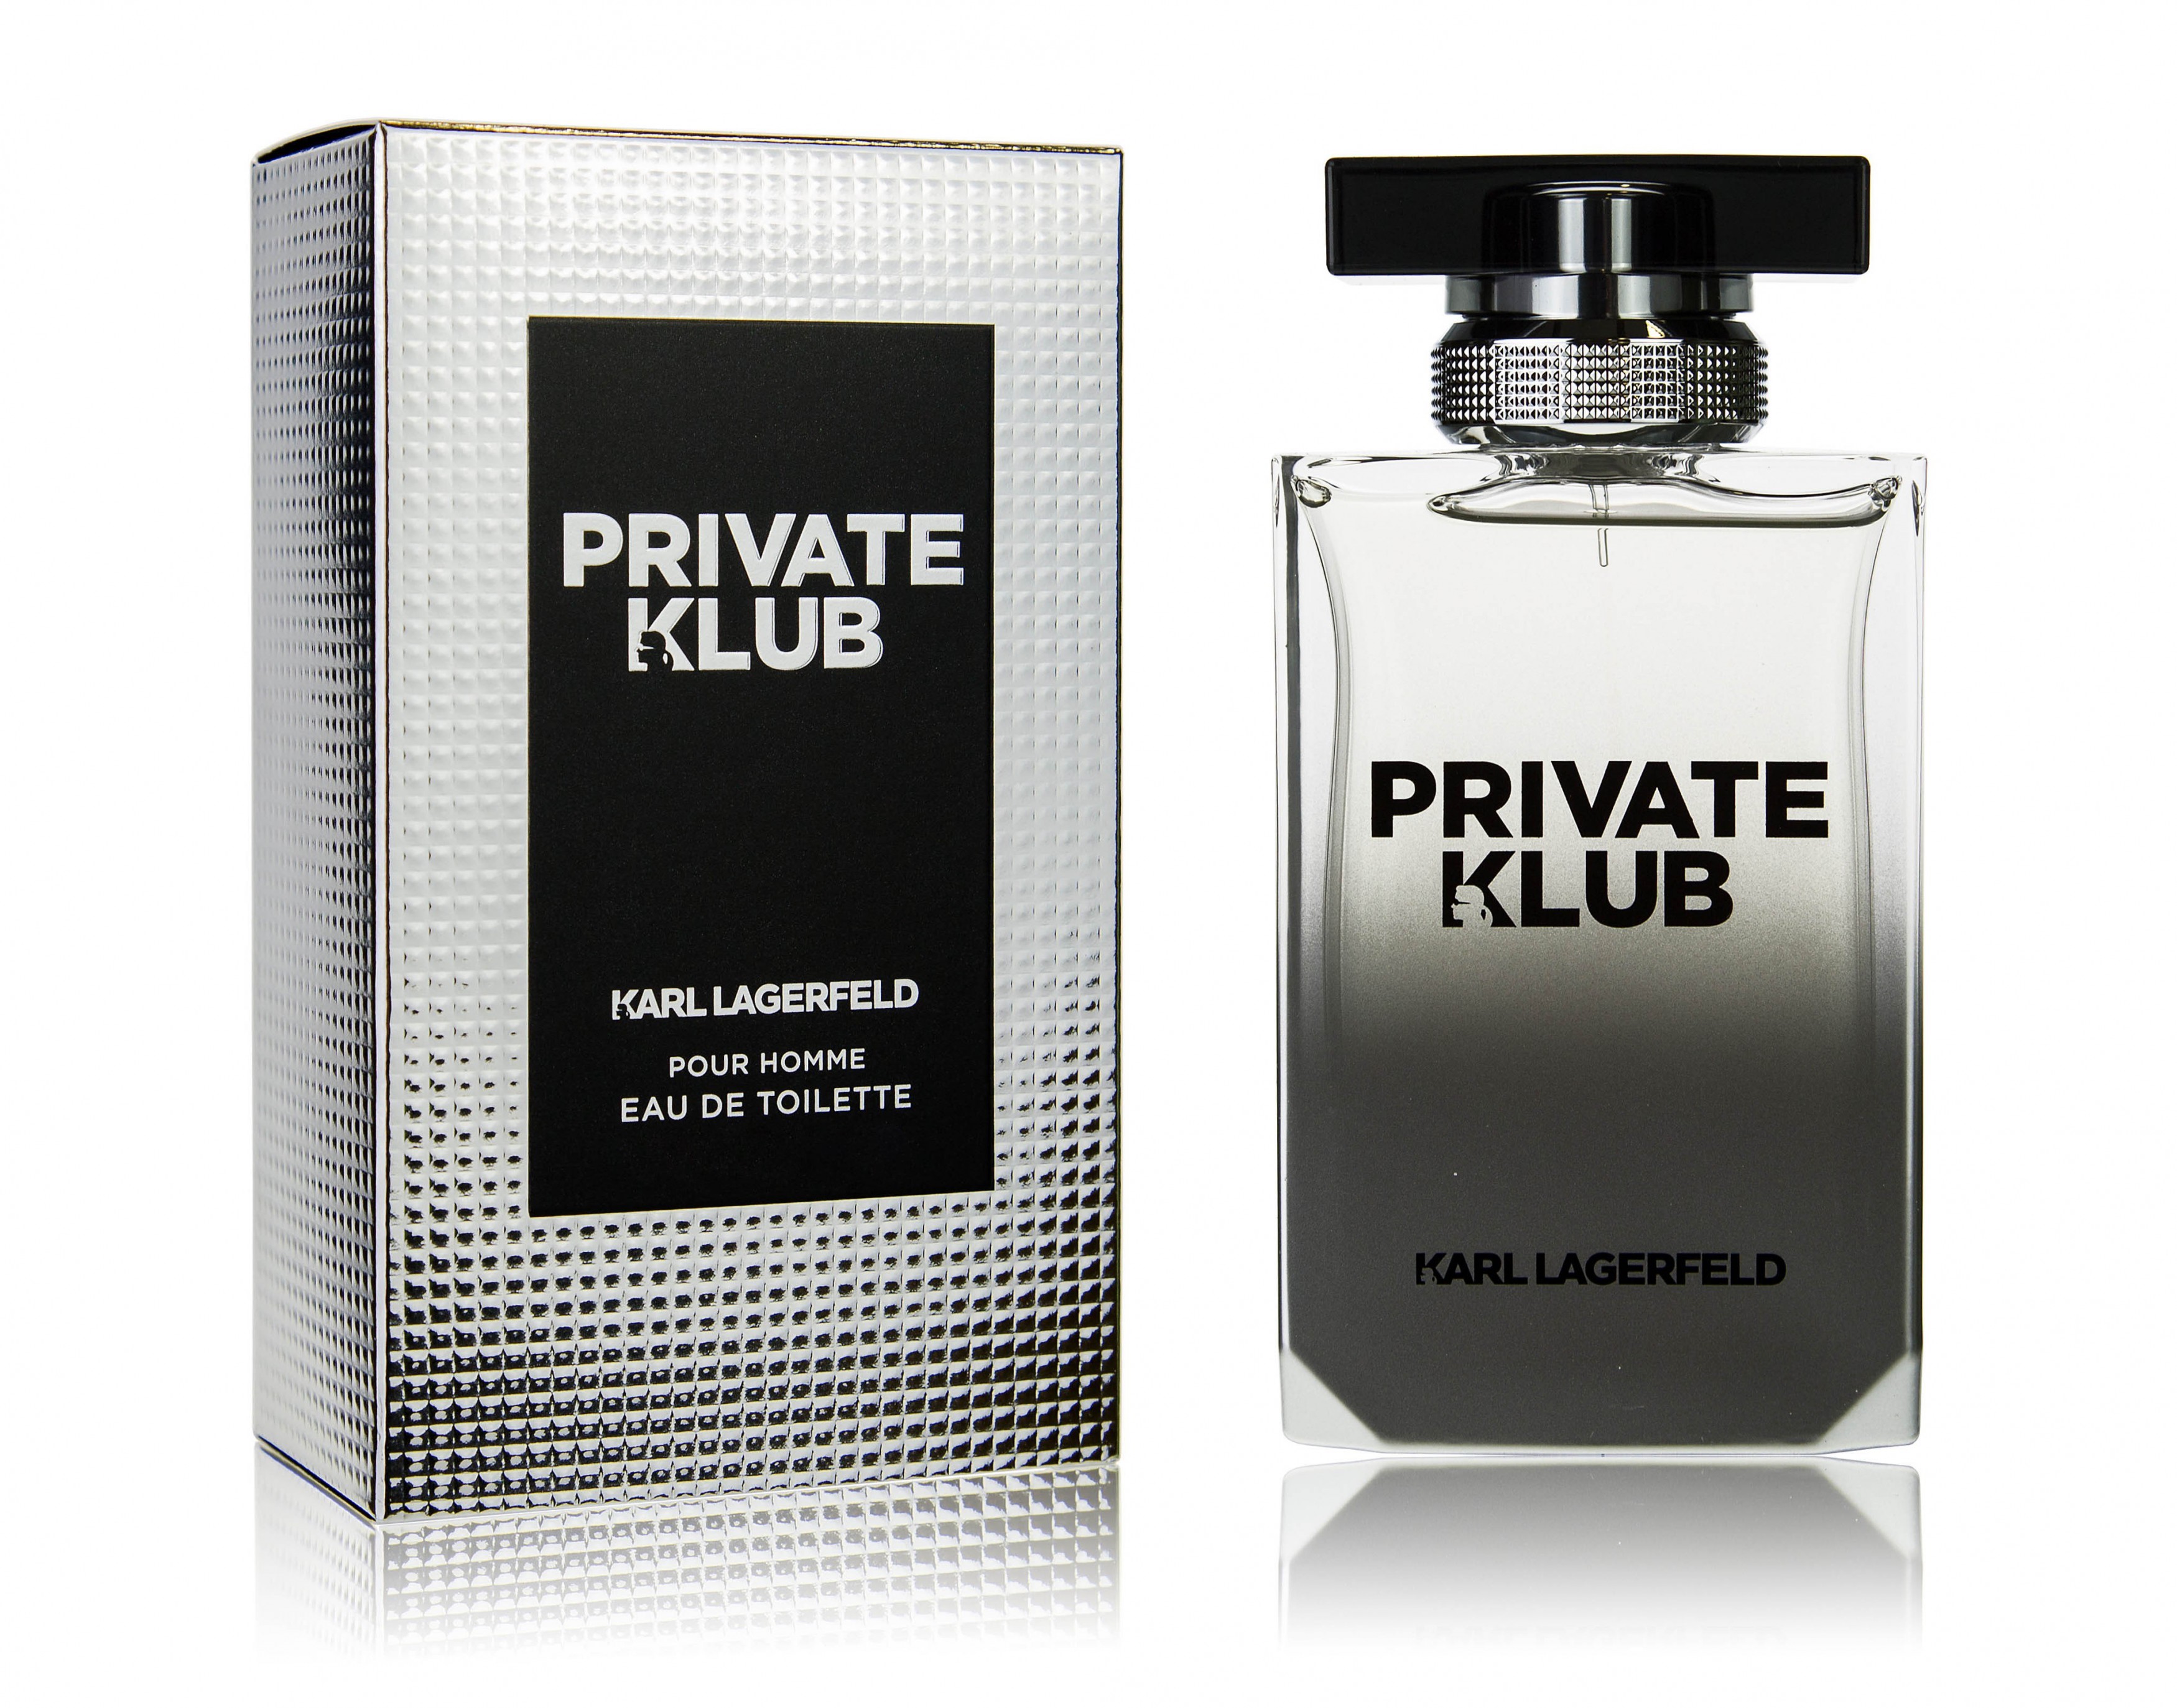 KARL LAGERFELD PRIVATE KLUB POUR HOMME